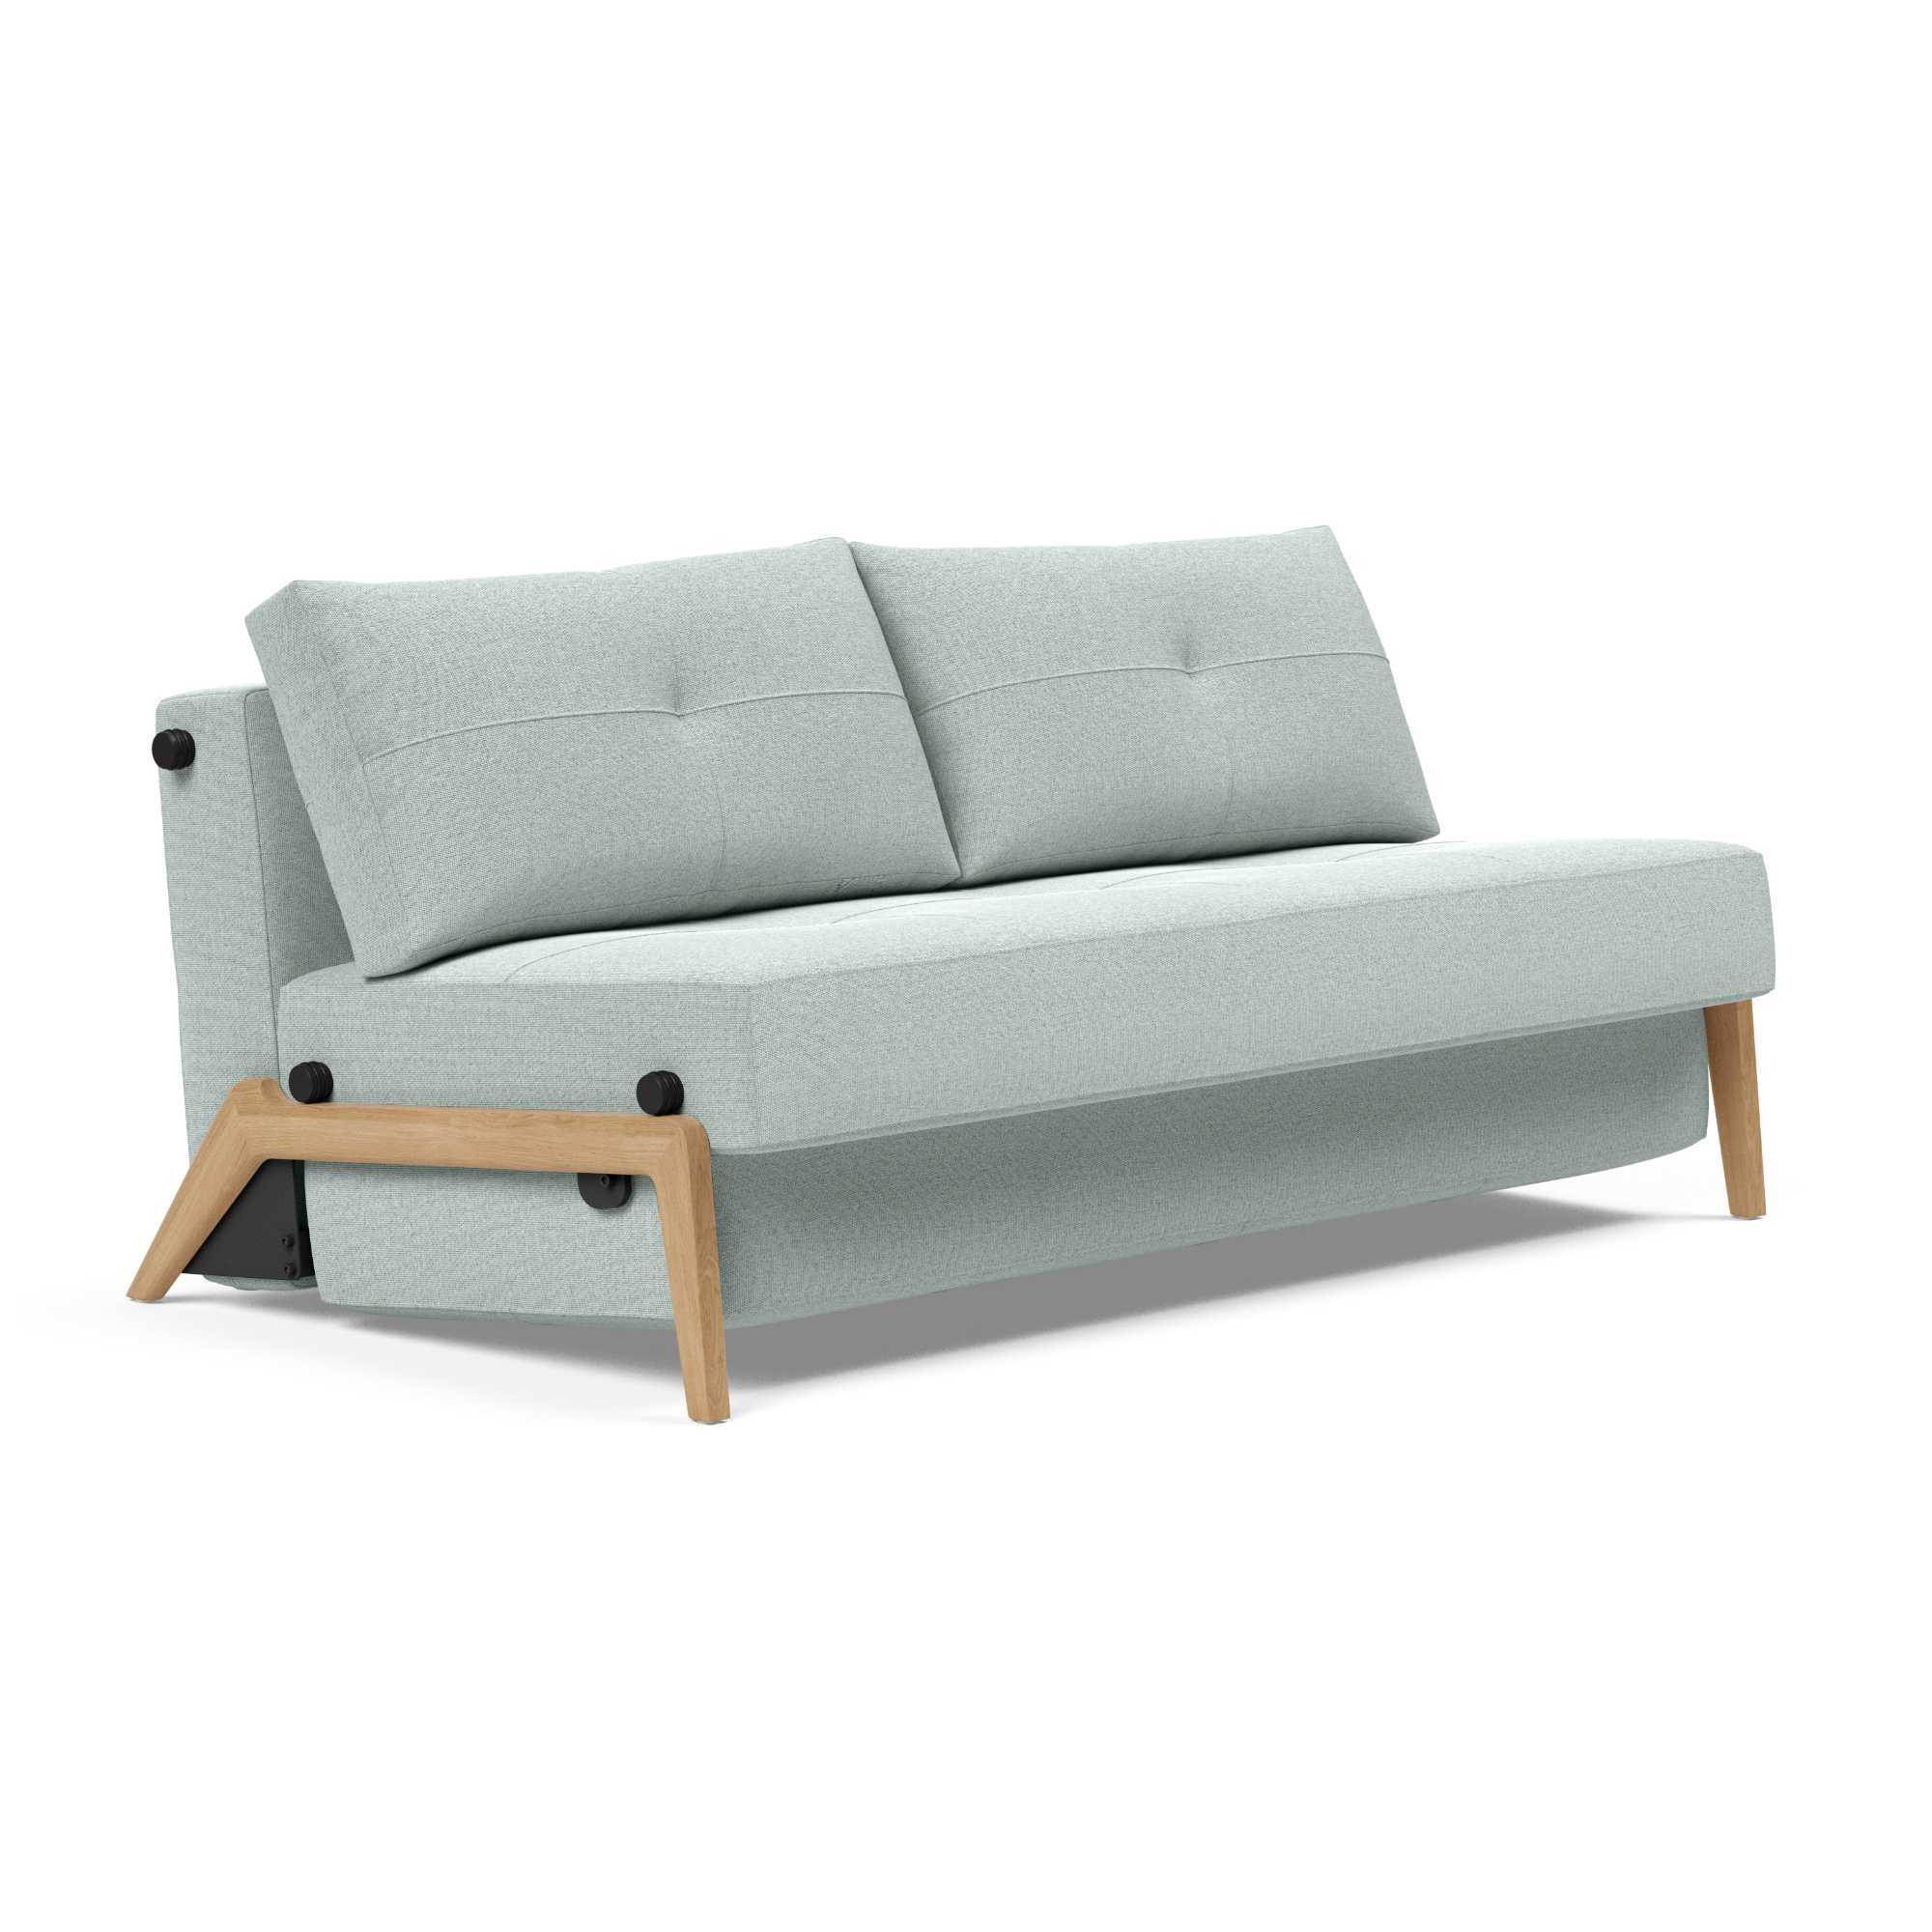 Innovation Living Cubed 160 Wood Sofa Bed, 552SoftPacificPearl w168xd98xh79cm